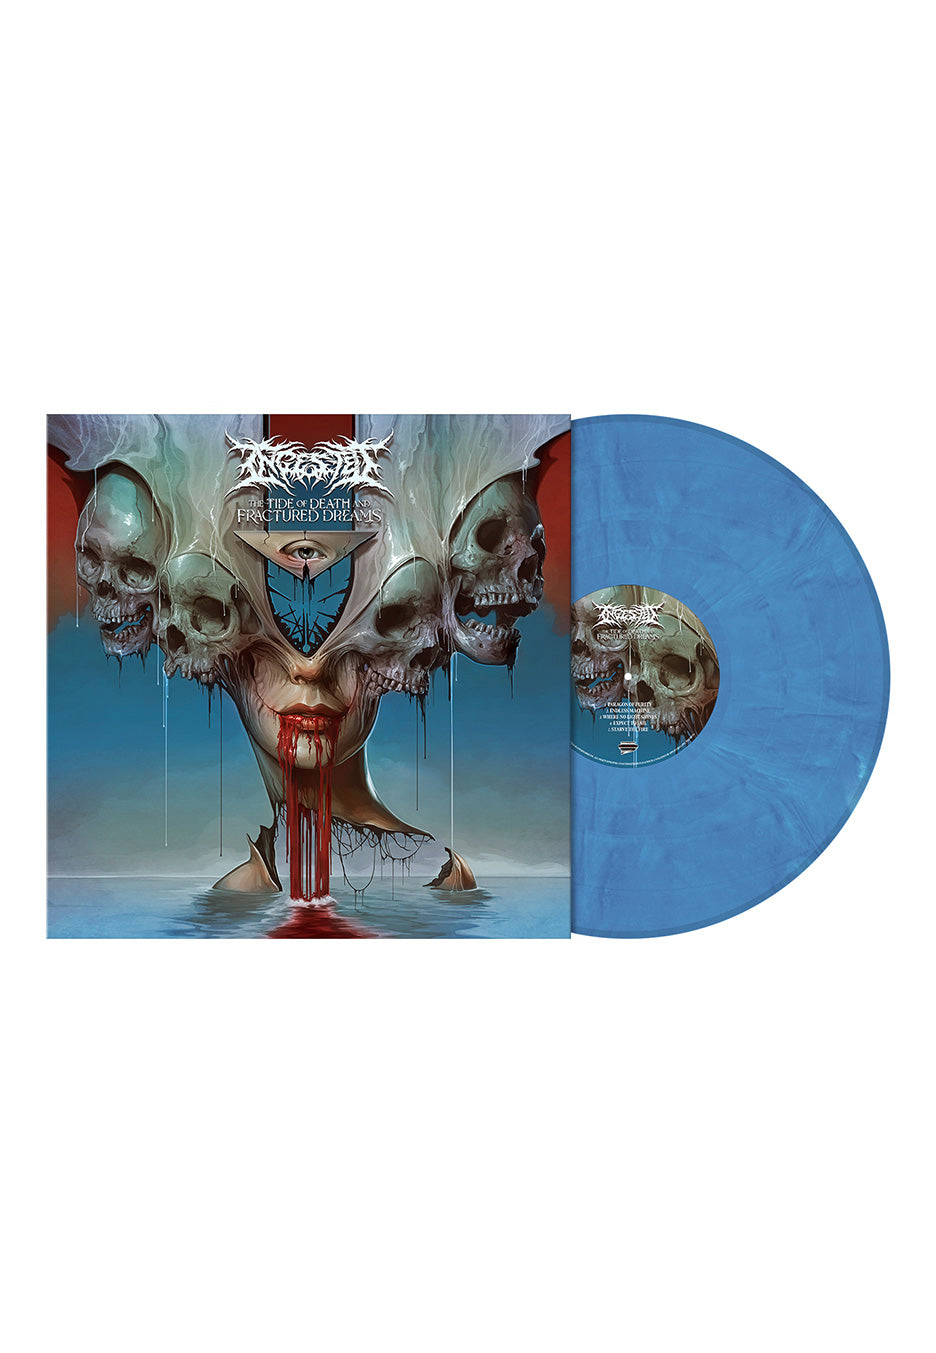 Ingested - The Tide Of Death And Fractured Dreams Blue - Marbled Vinyl